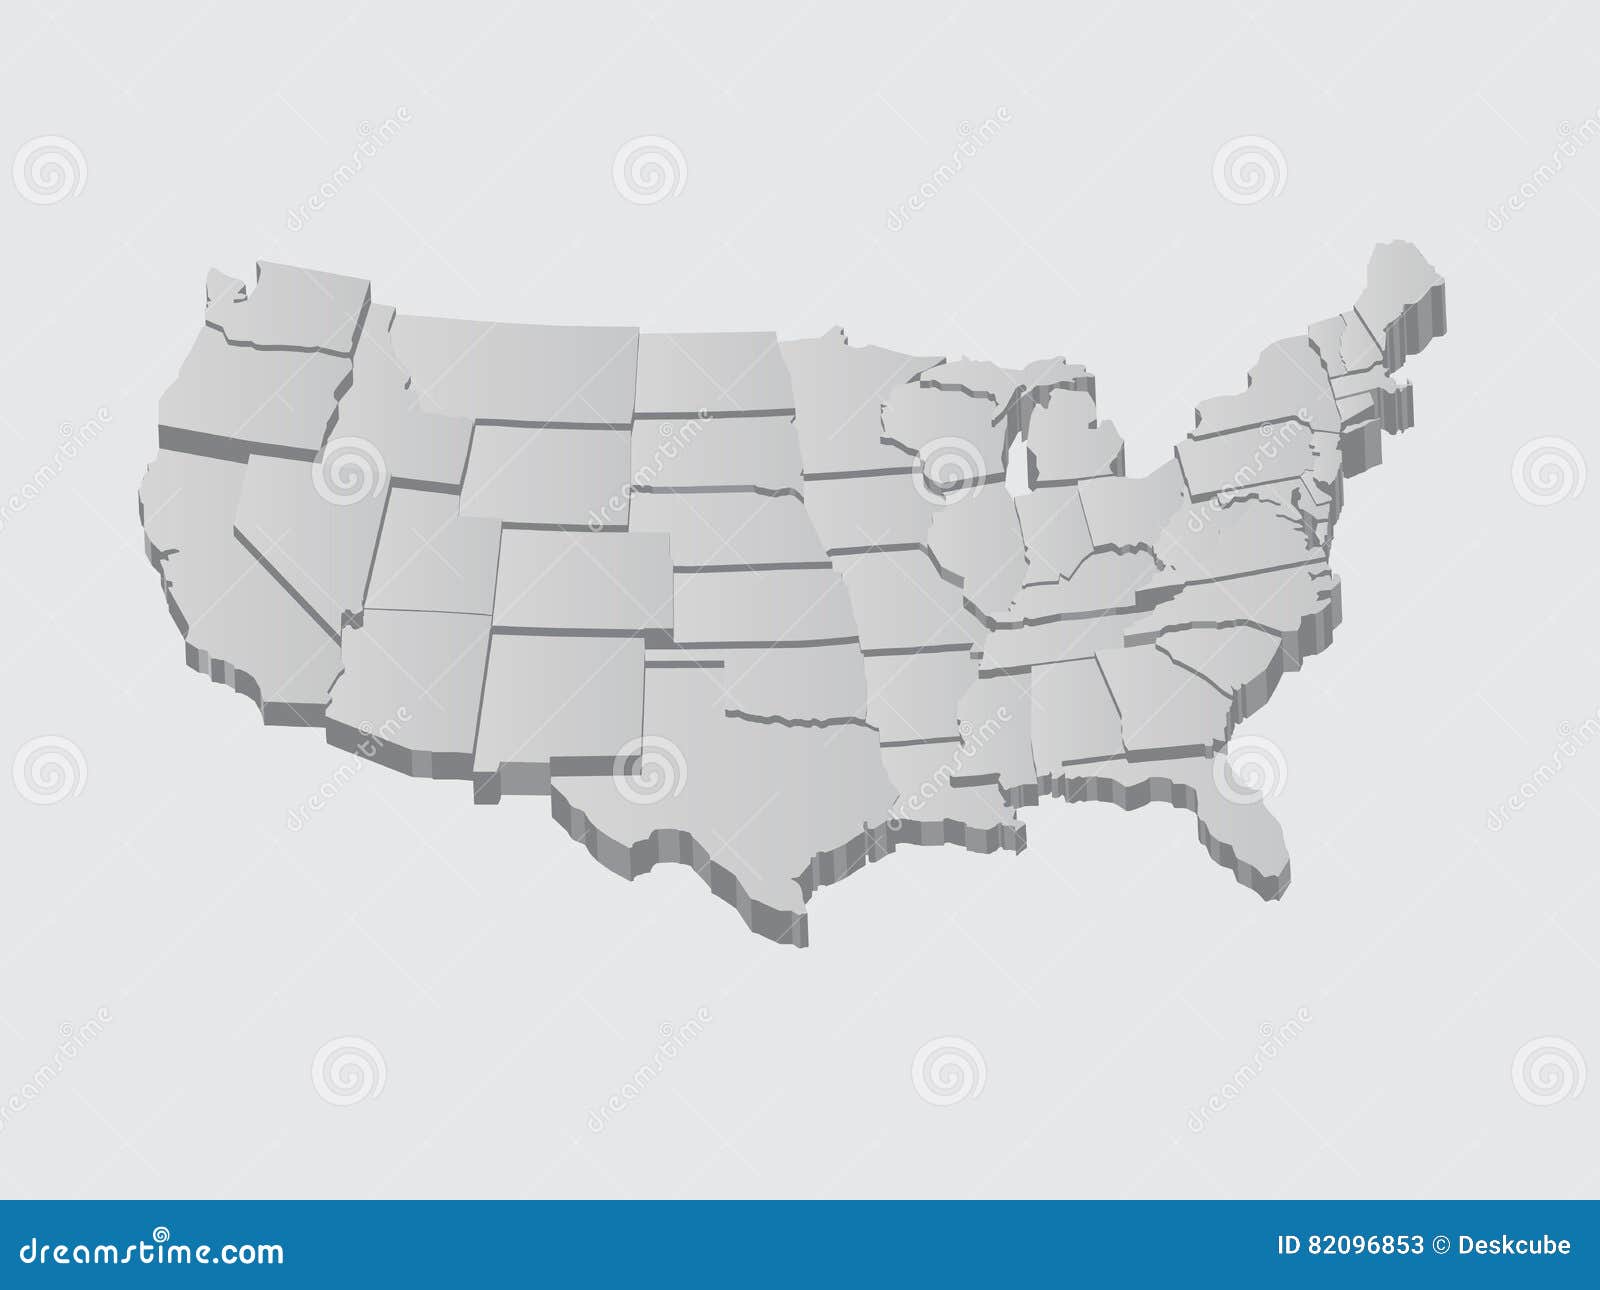 United States 3d Vector Map Illustration Stock Vector